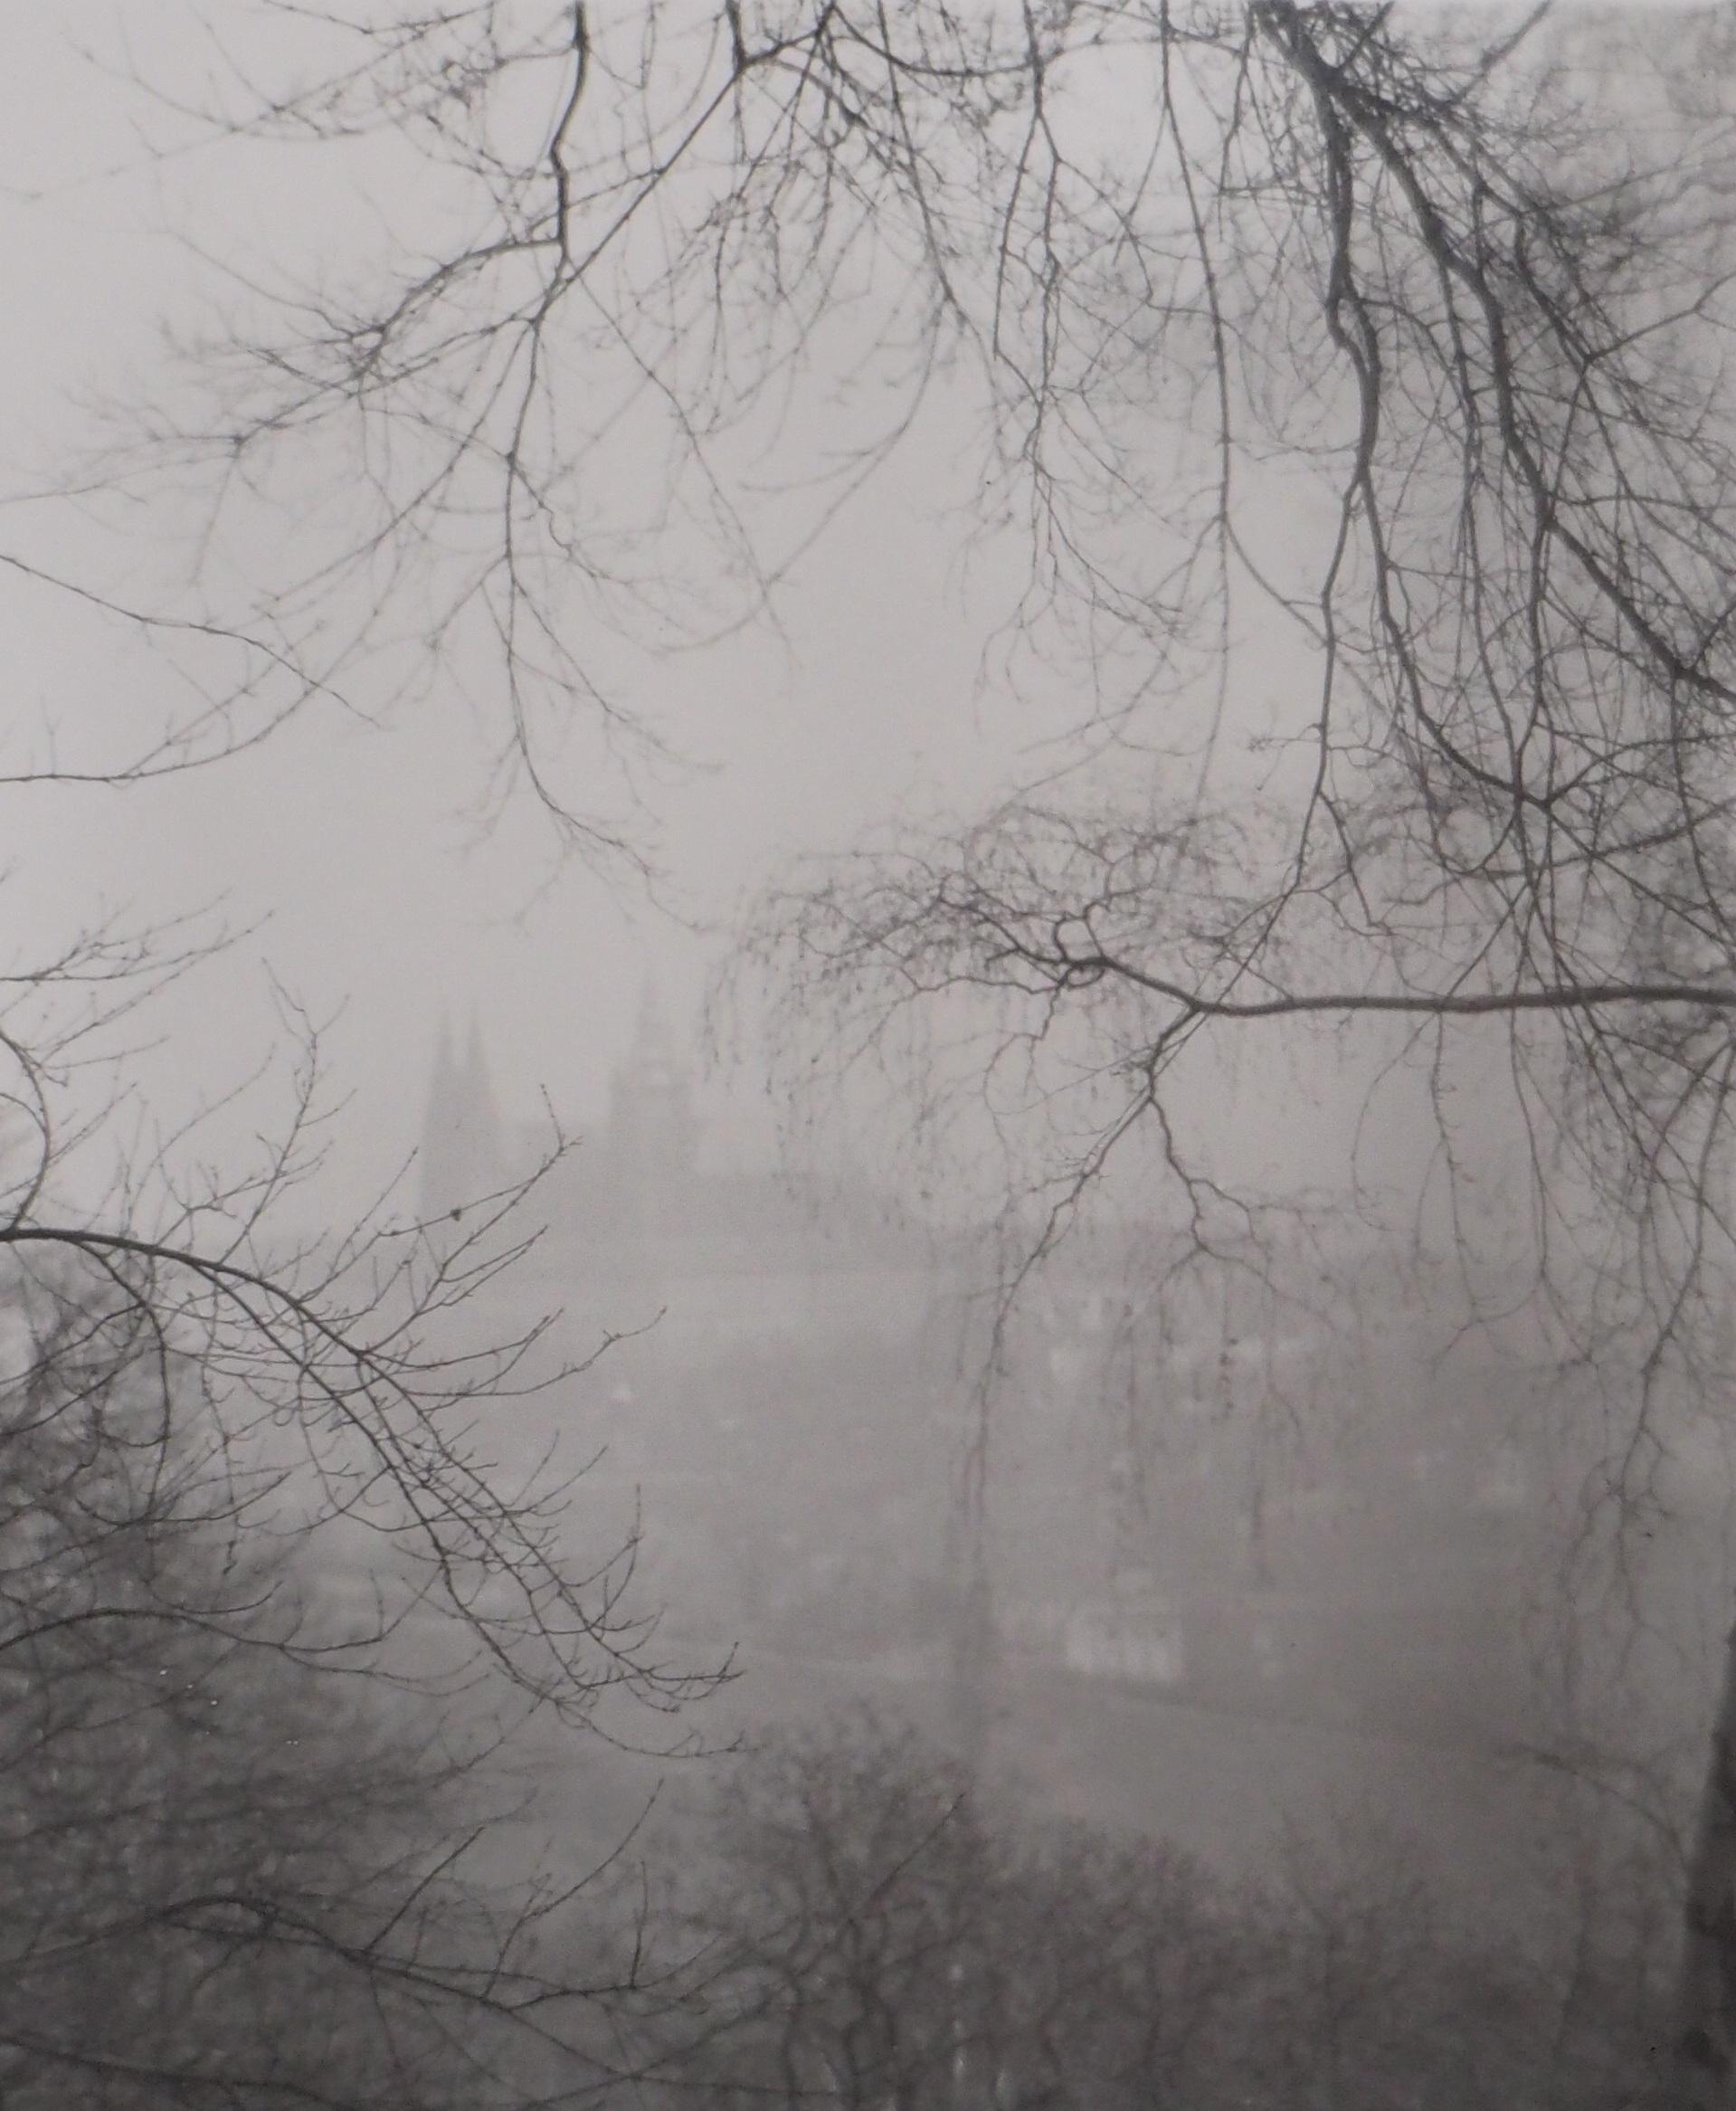 Josef Sudek
Prague Castle in the Fog, 1972

Original gelatin silver print
Hand signed in pencil in the lower right corner (see picture)
29.7 x 23.7 cm (c. 11.4 x 9 in)
Dated on the back (see picture)

Authenticated by the collection stamp on the